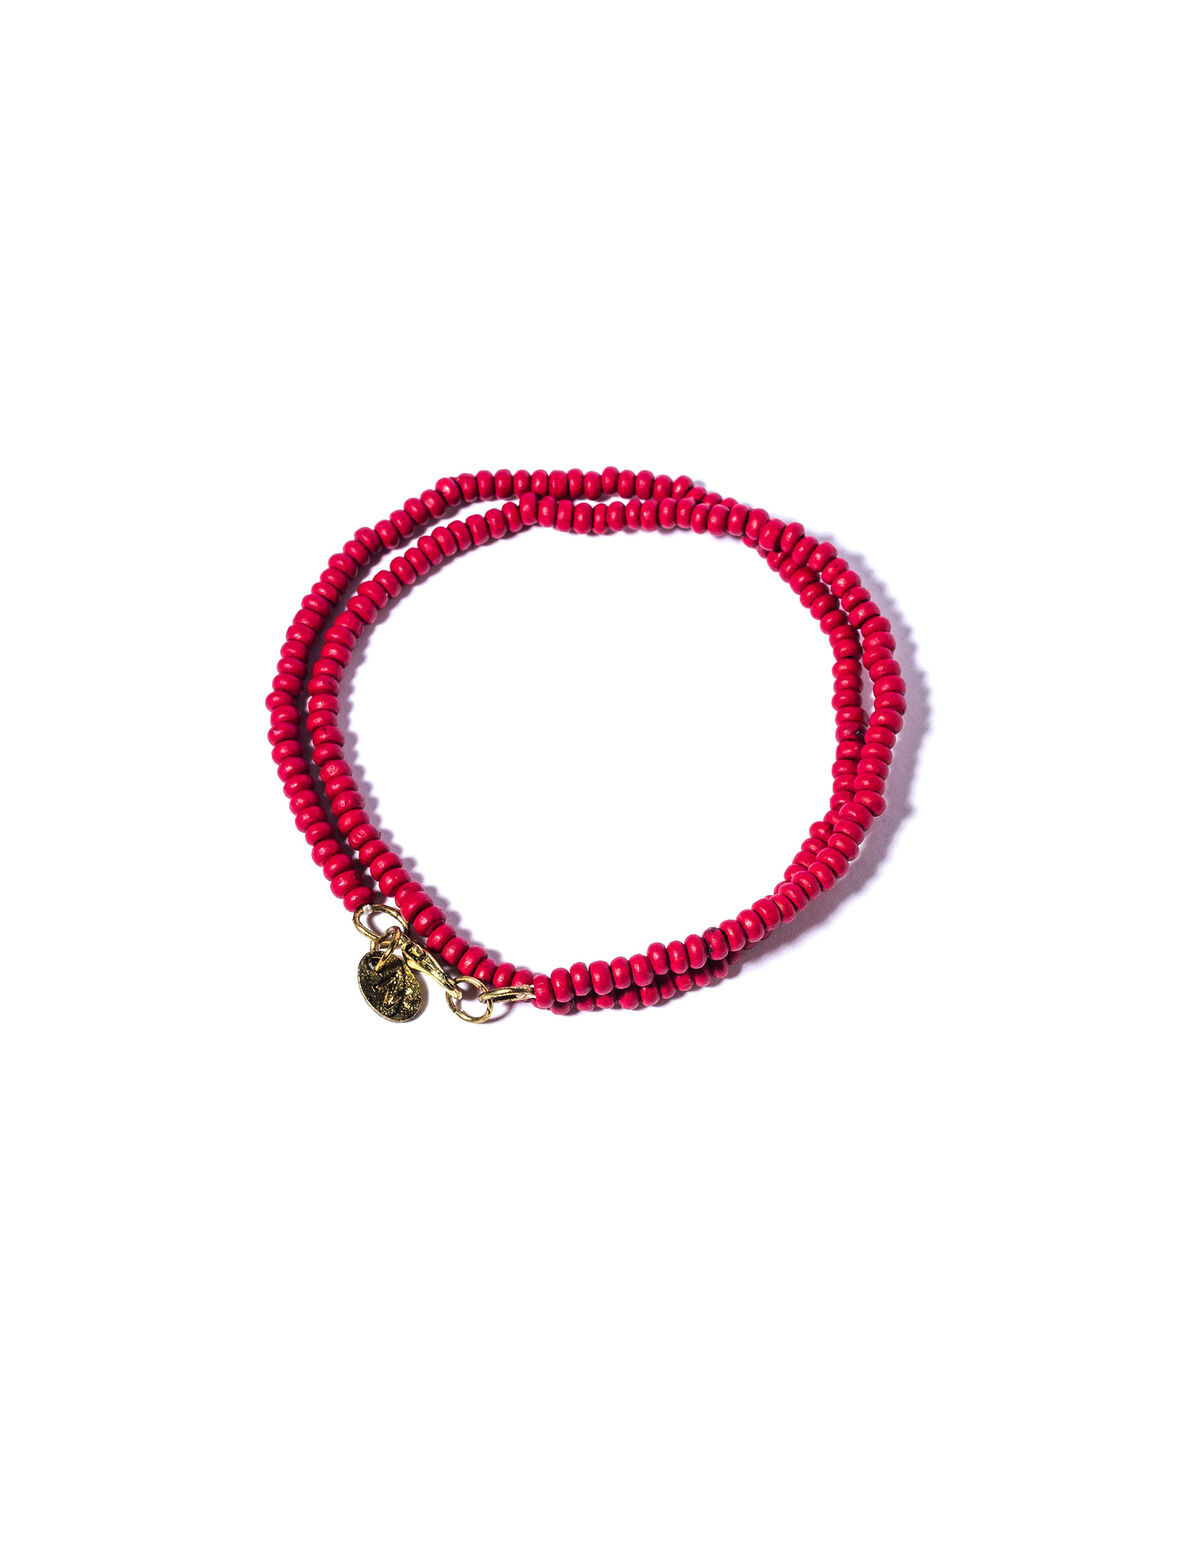 Short beaded red necklace - Jewelry - Nícoli